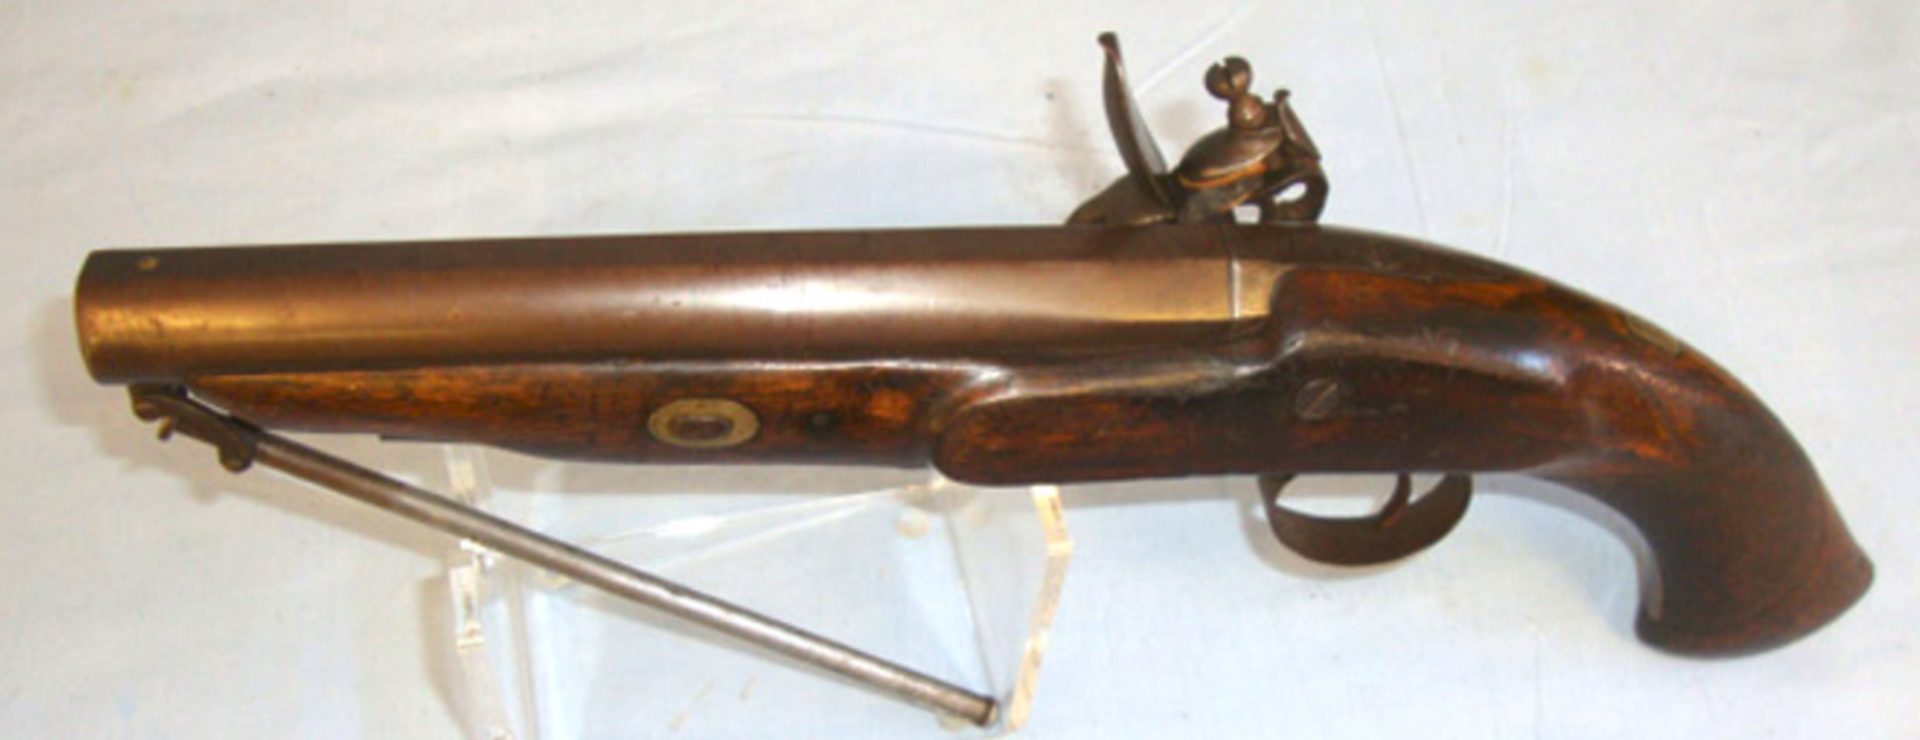 RARE, C1815 .750 Musket Bore, Flintlock Holster Pistol By Lacy & Co London - Image 2 of 3